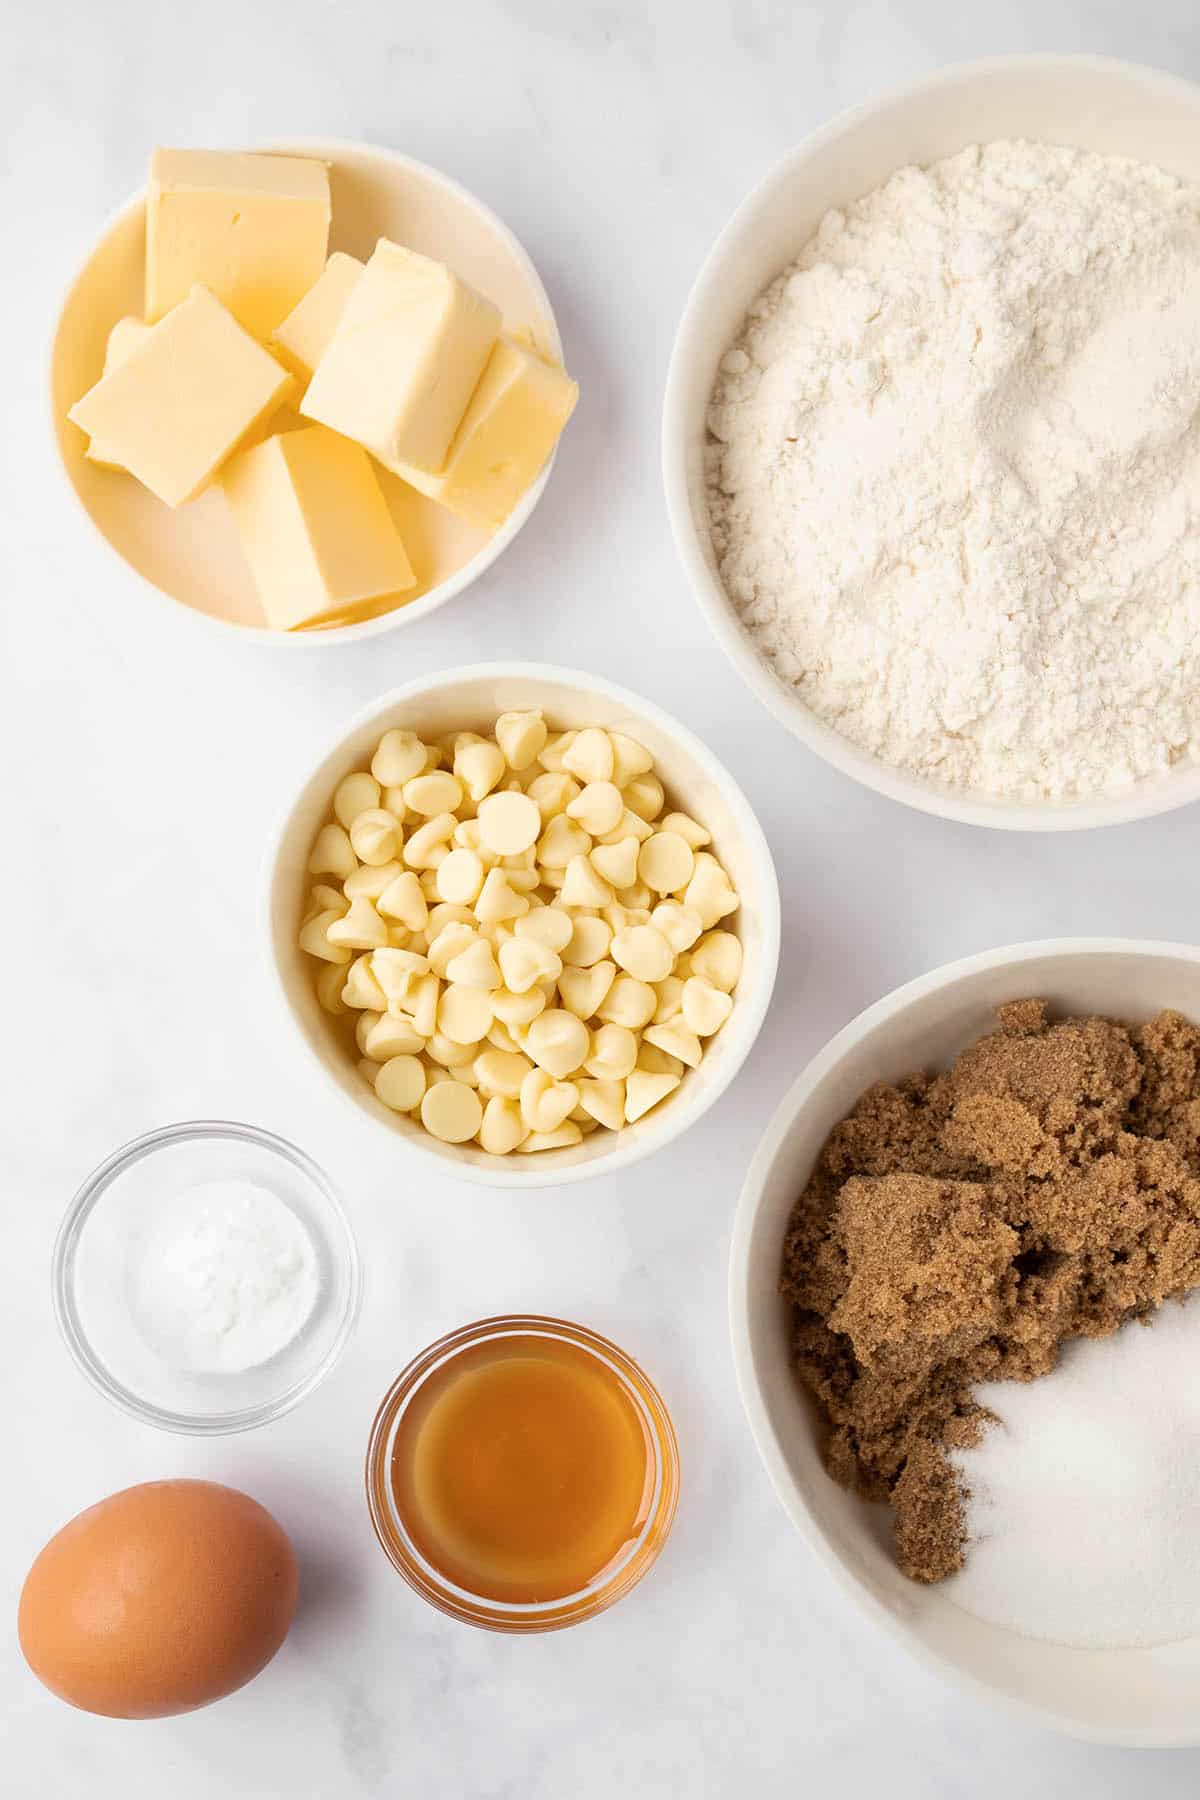 All the ingredients needed to make White Chocolate Chip Cookies from scratch.